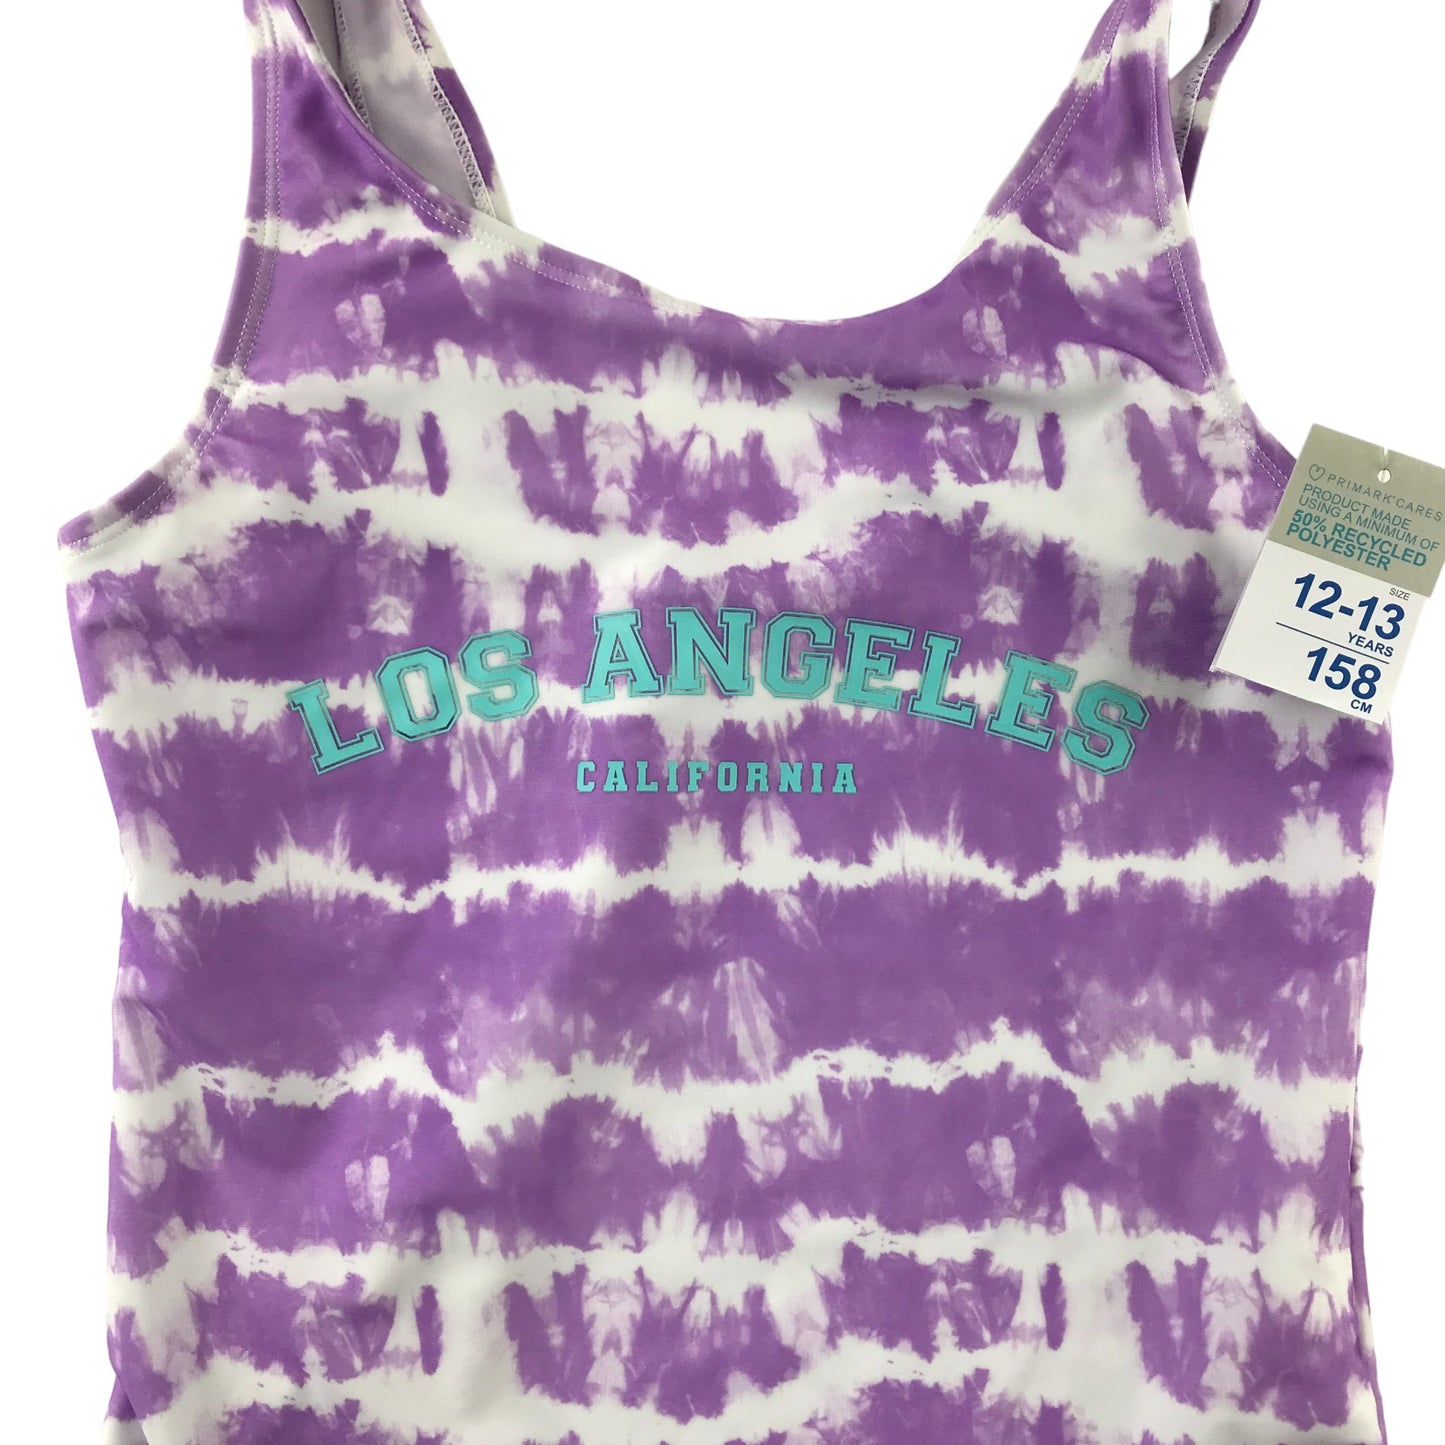 Primark Swimsuit Age 12 Lilac and White Tie Dye Los Angeles One Piece Cossie